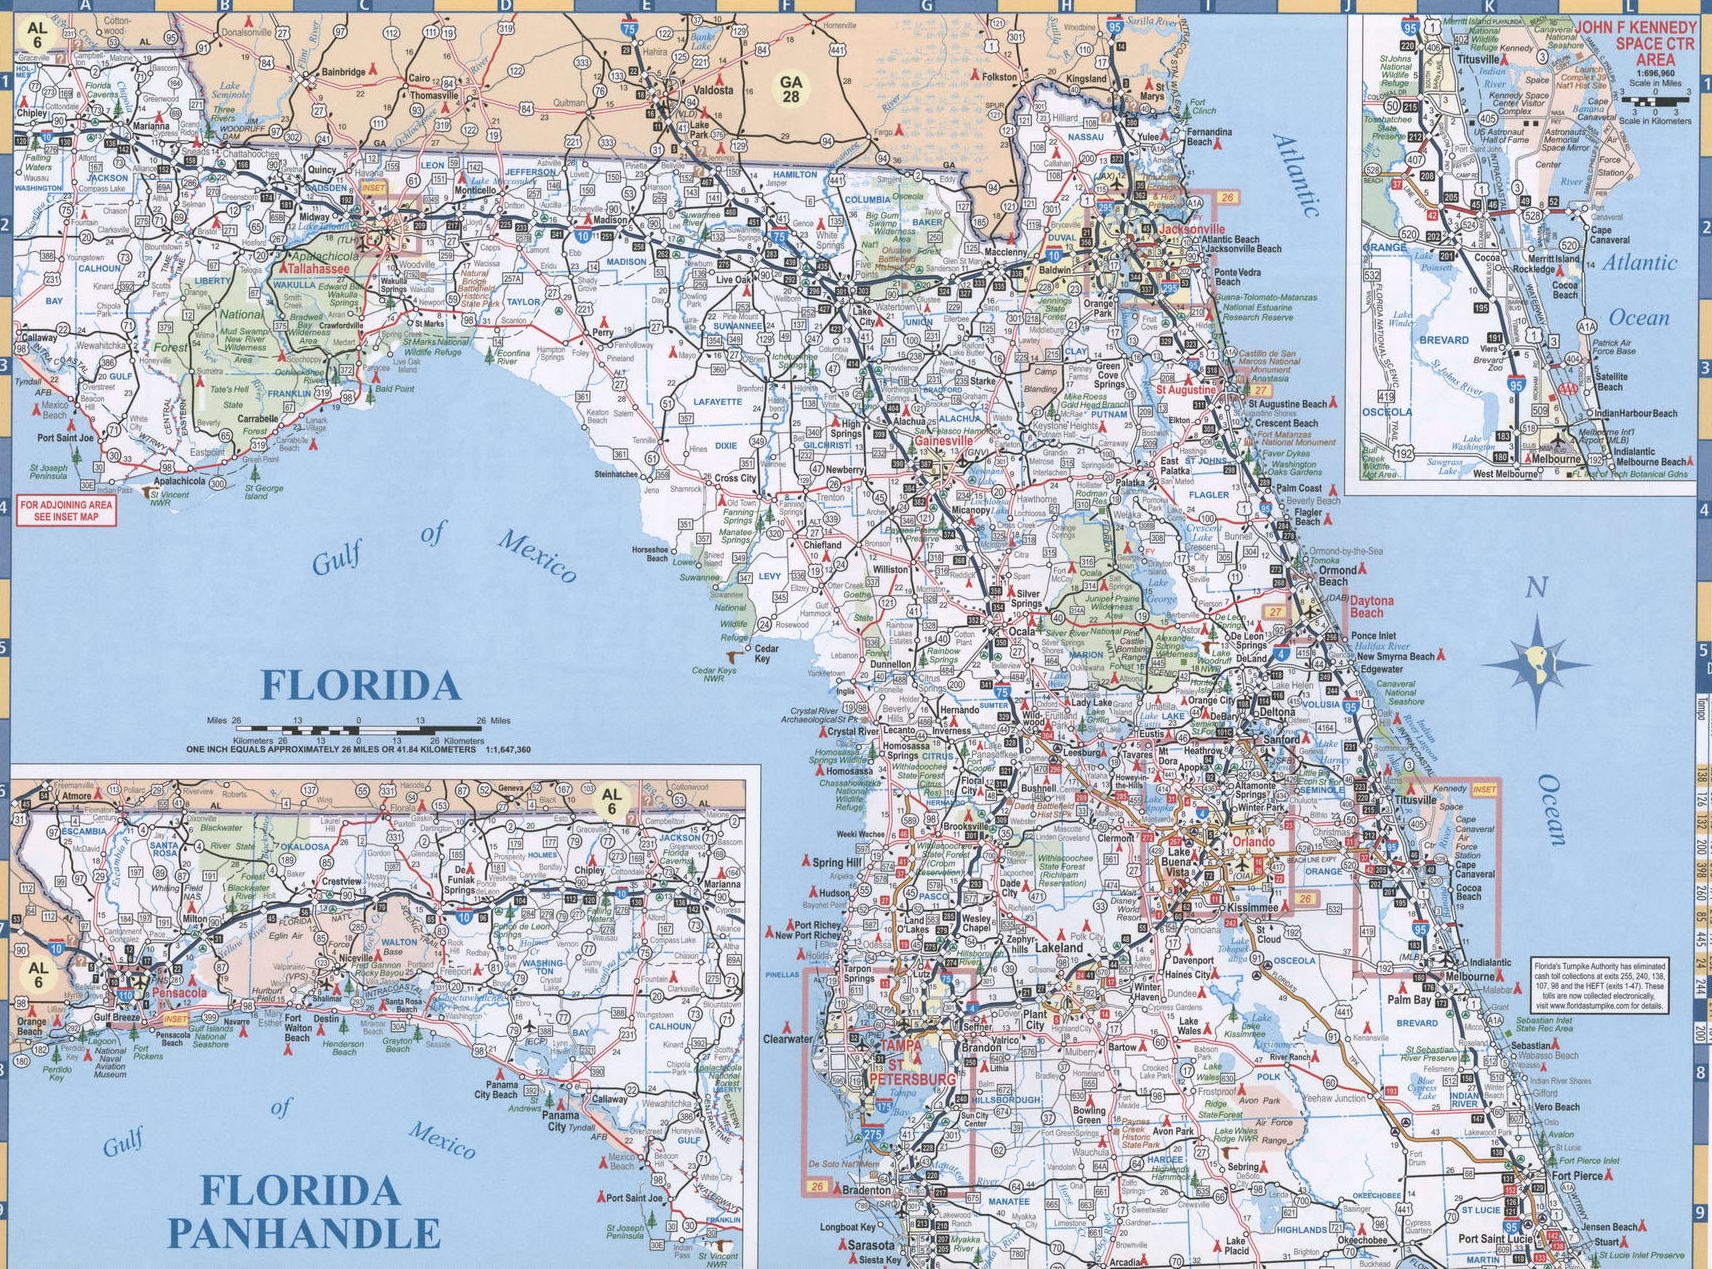 latest-florida-in-map-of-usa-free-new-photos-new-florida-map-with-cities-and-photos